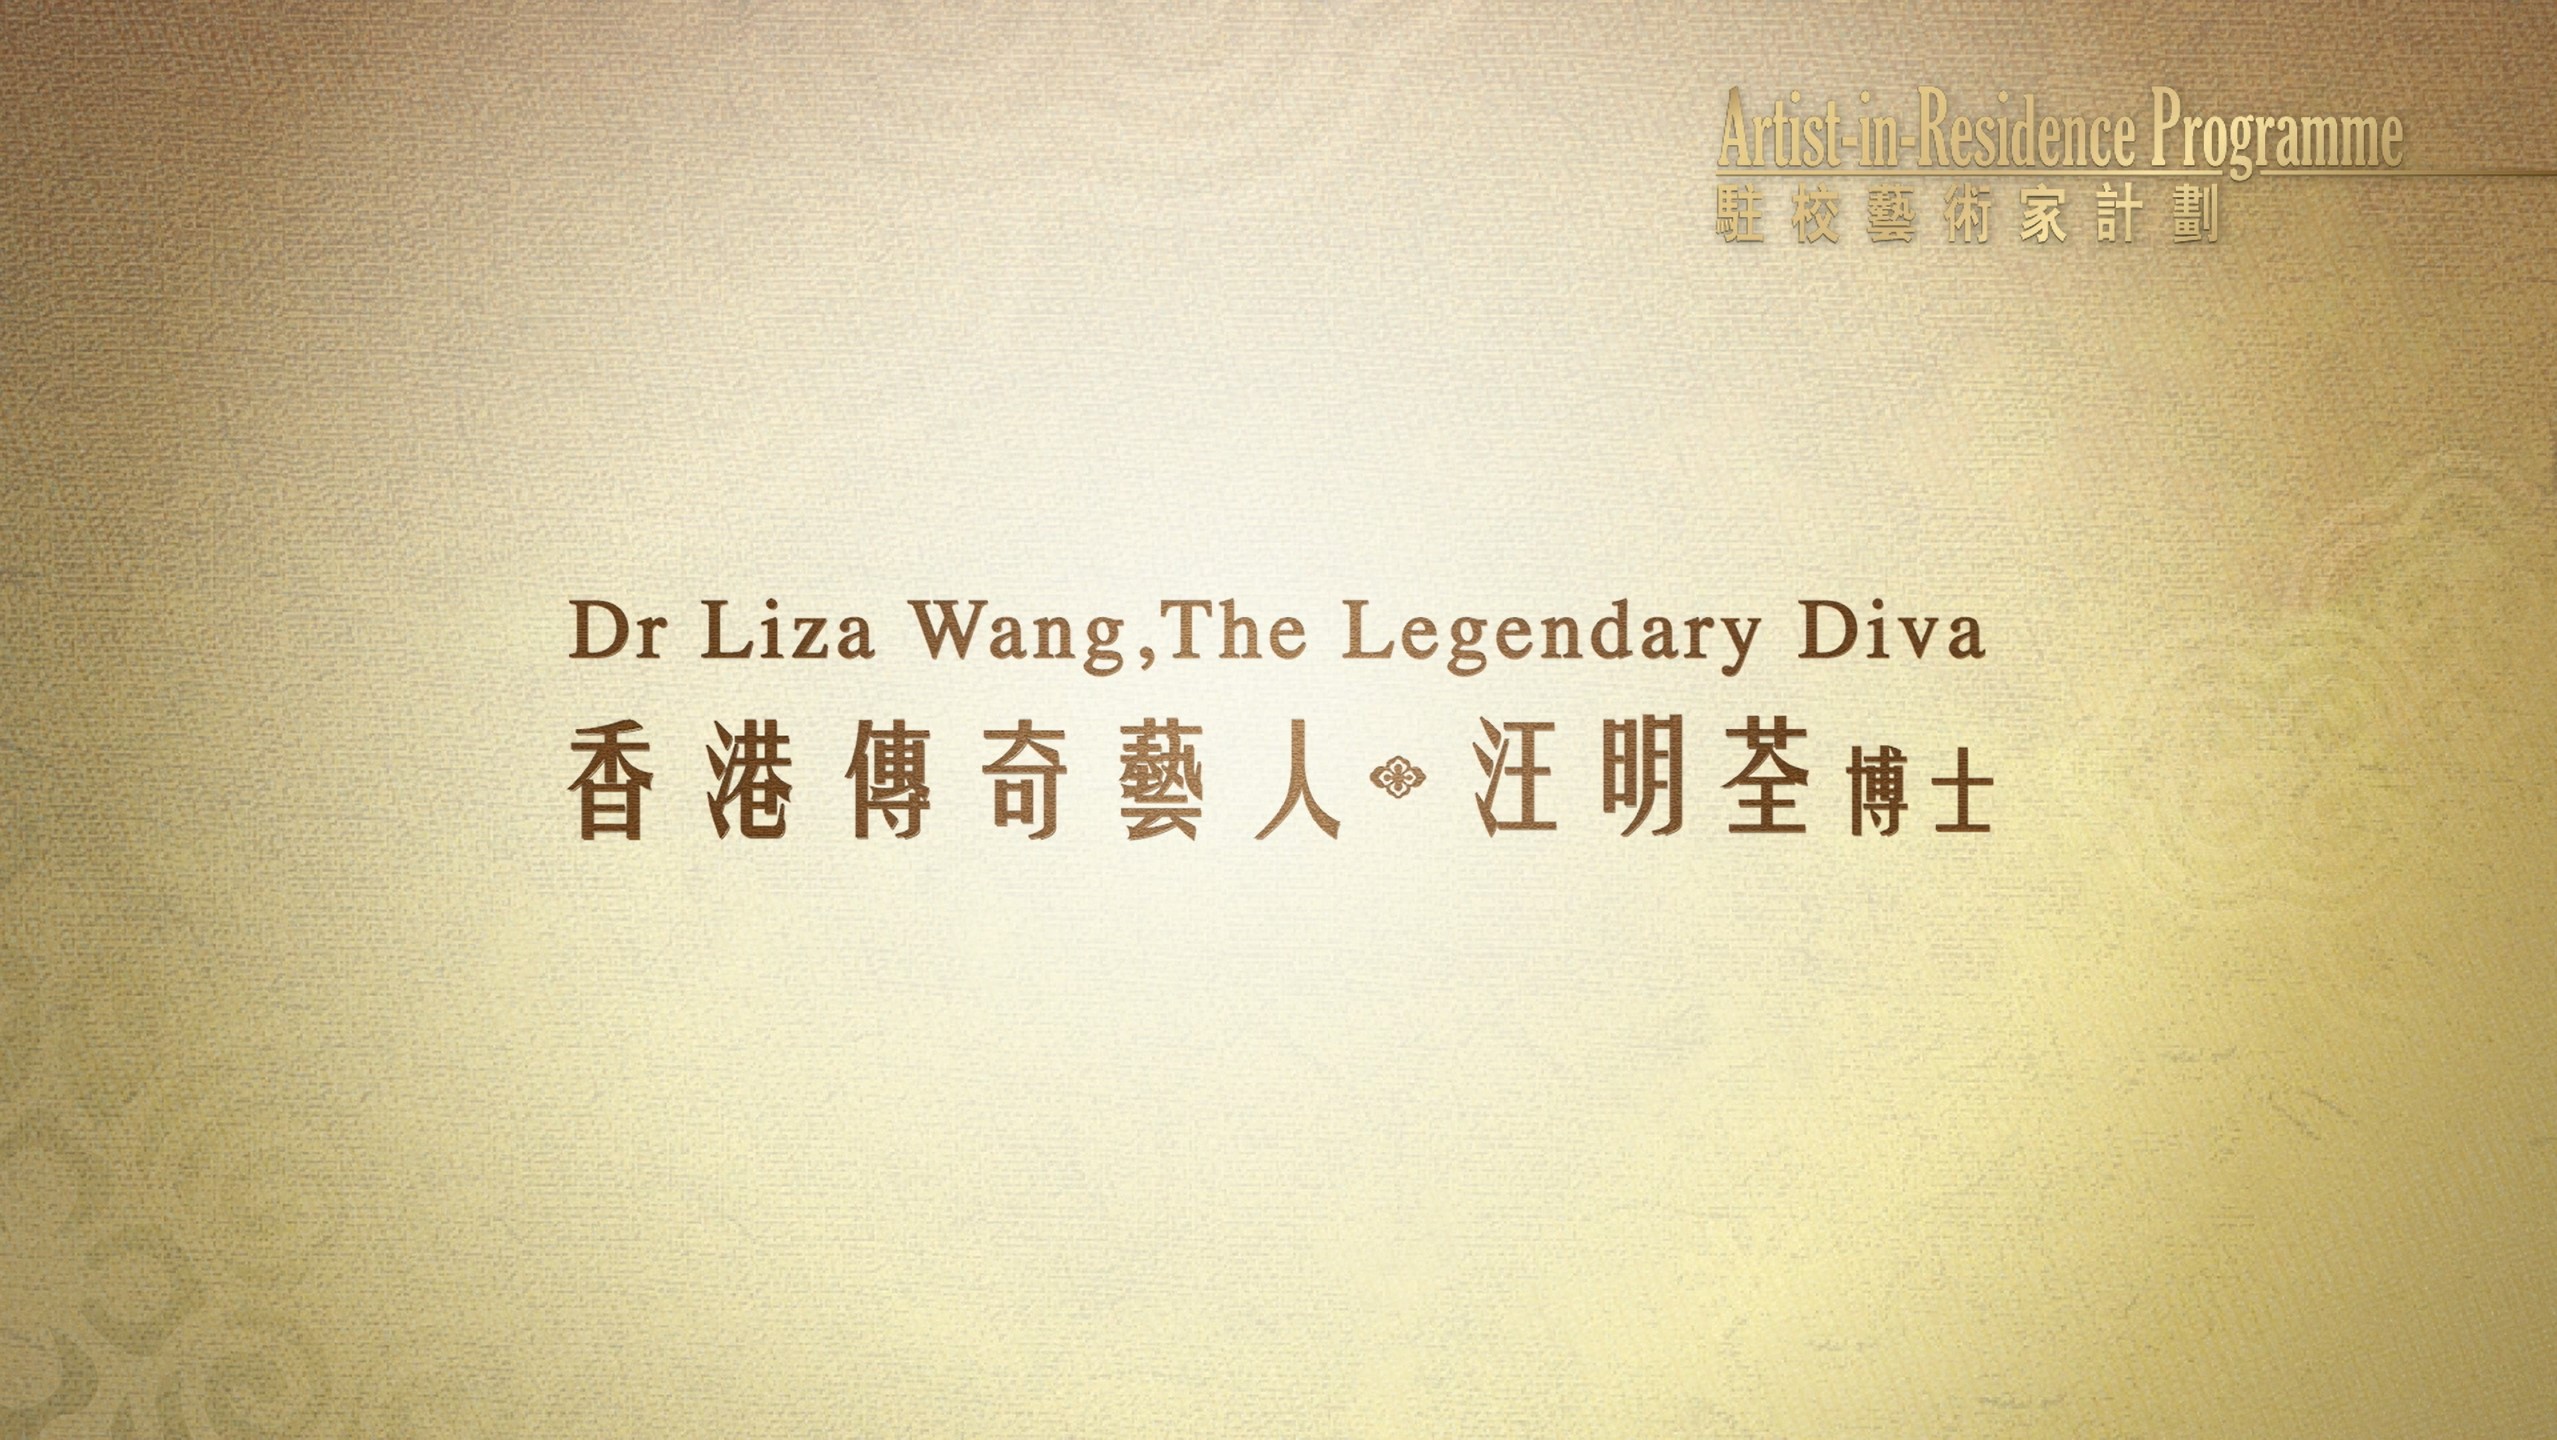 Dr Liza Wang (Episode 3): “I want to see Cantonese opera live on”